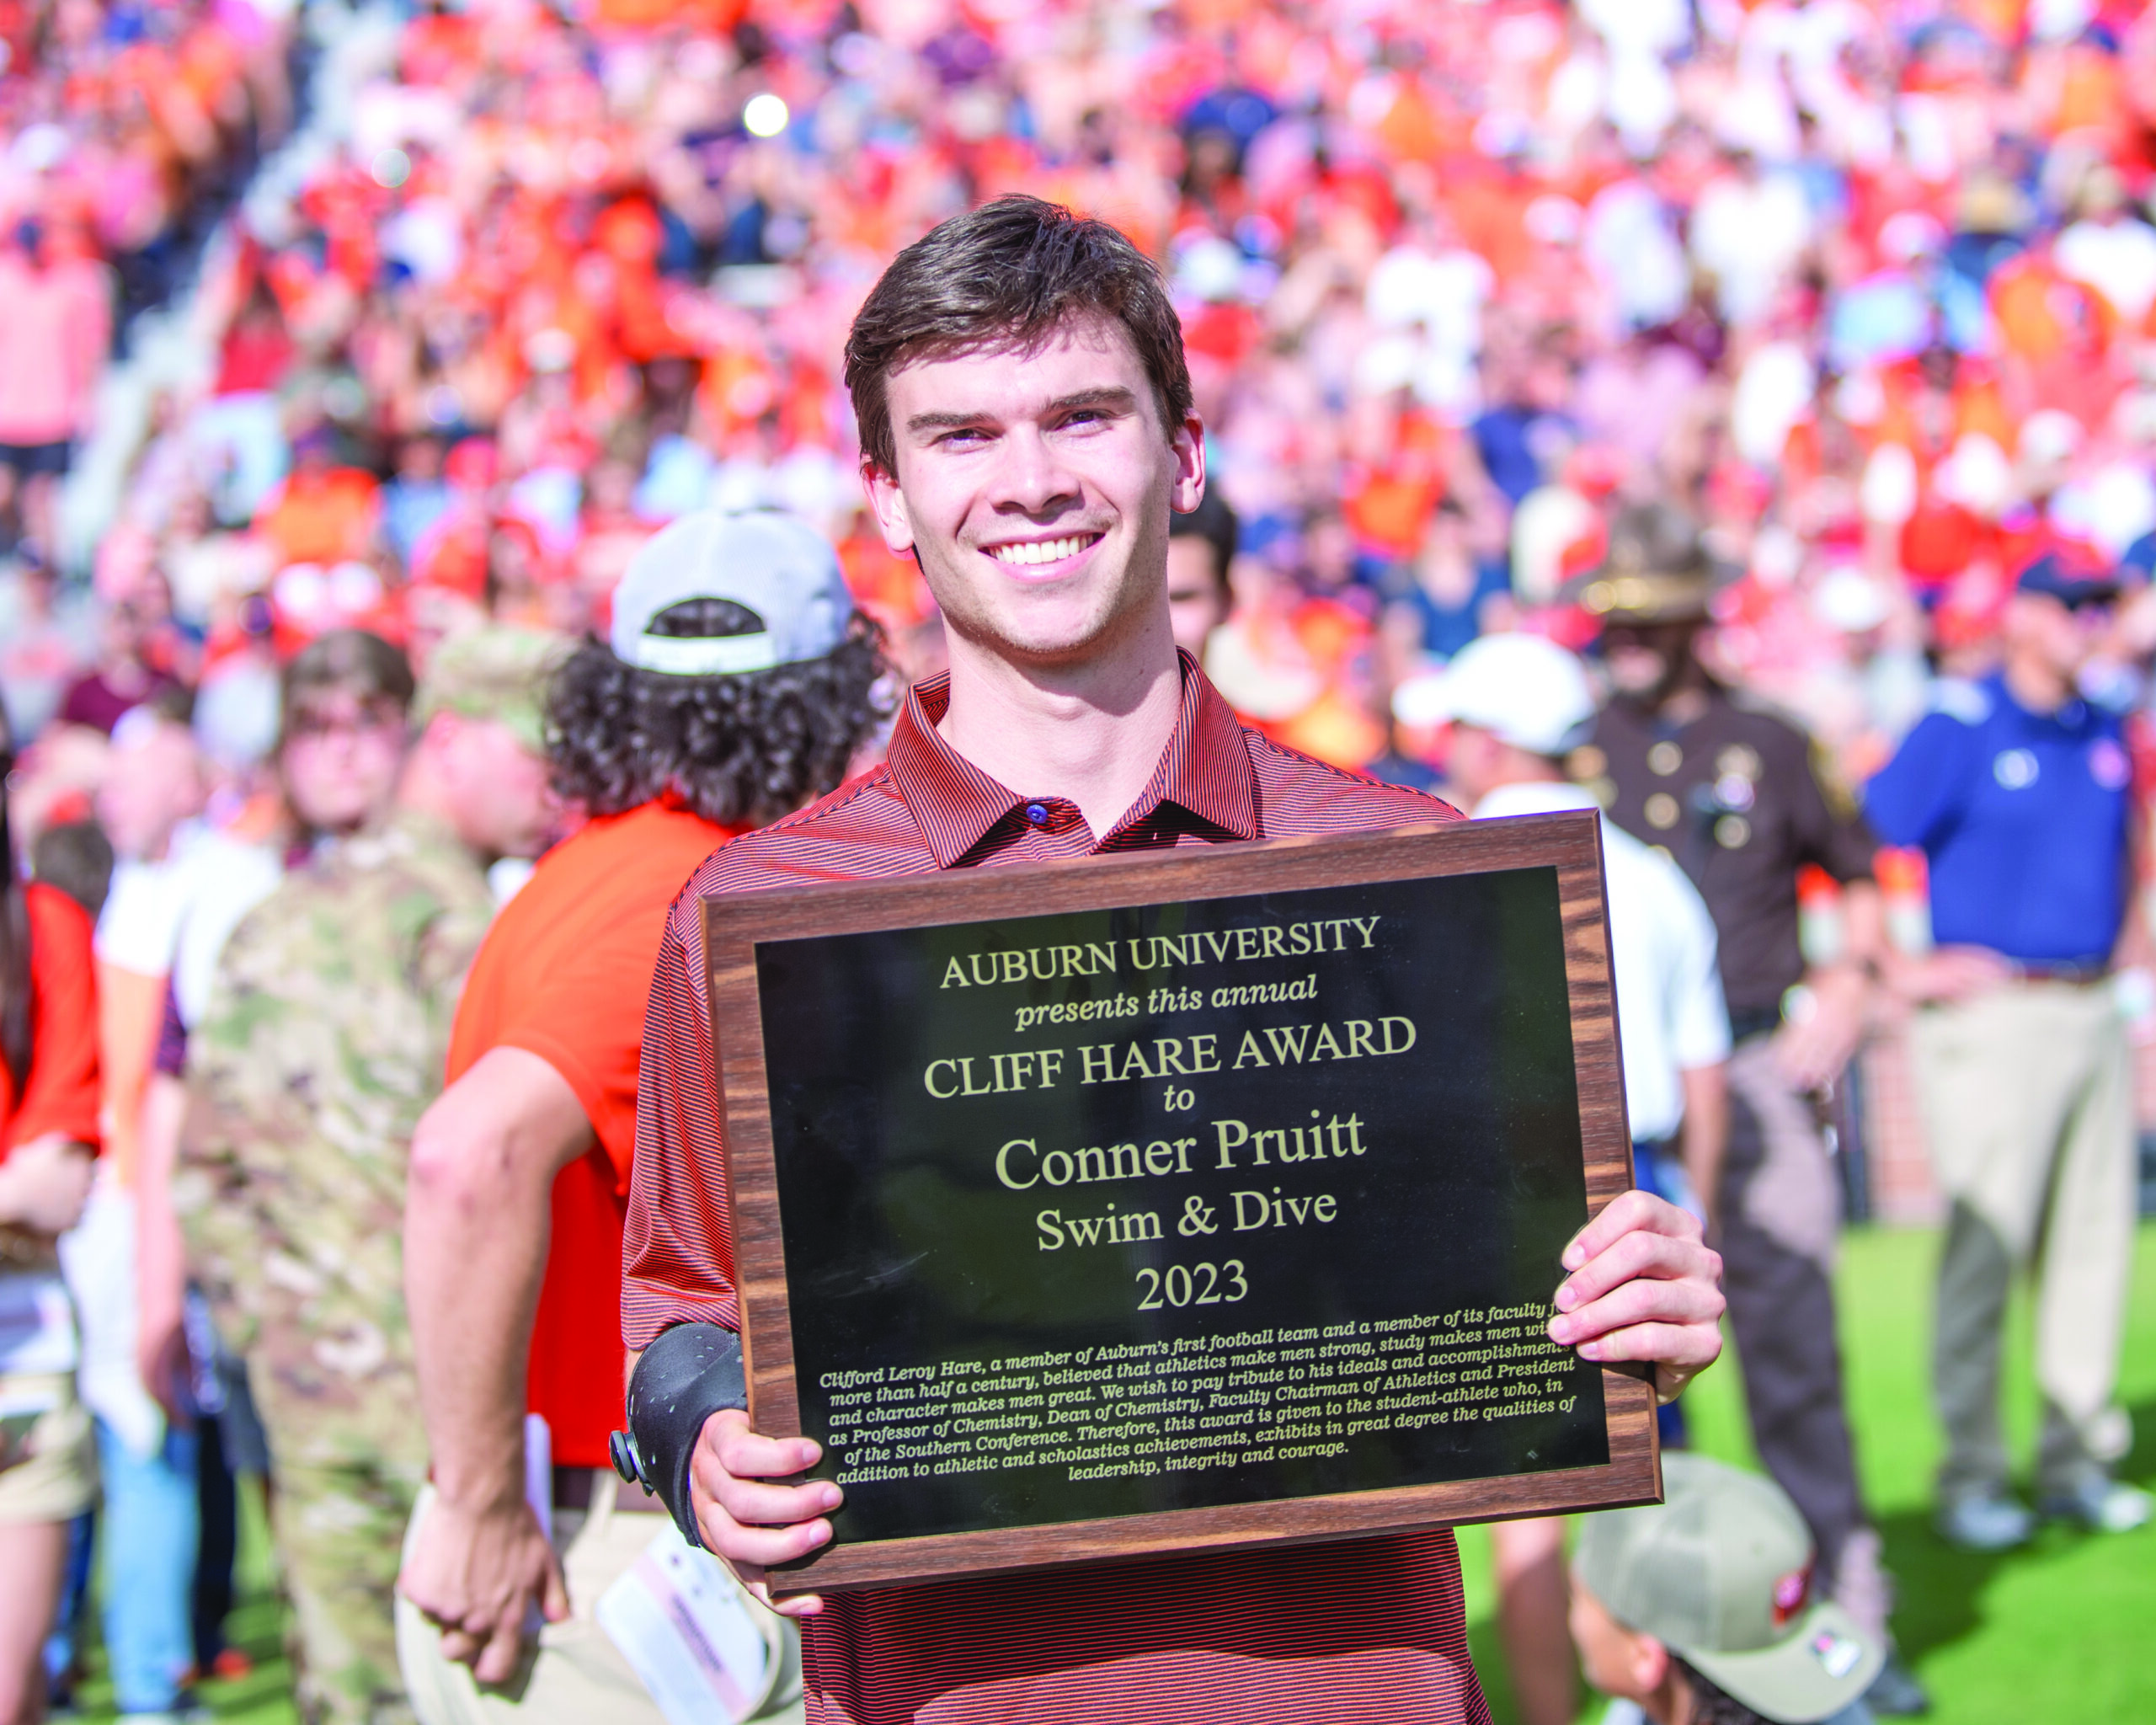 2023 Cliff Hare Award presented during AU Game Oct. 28